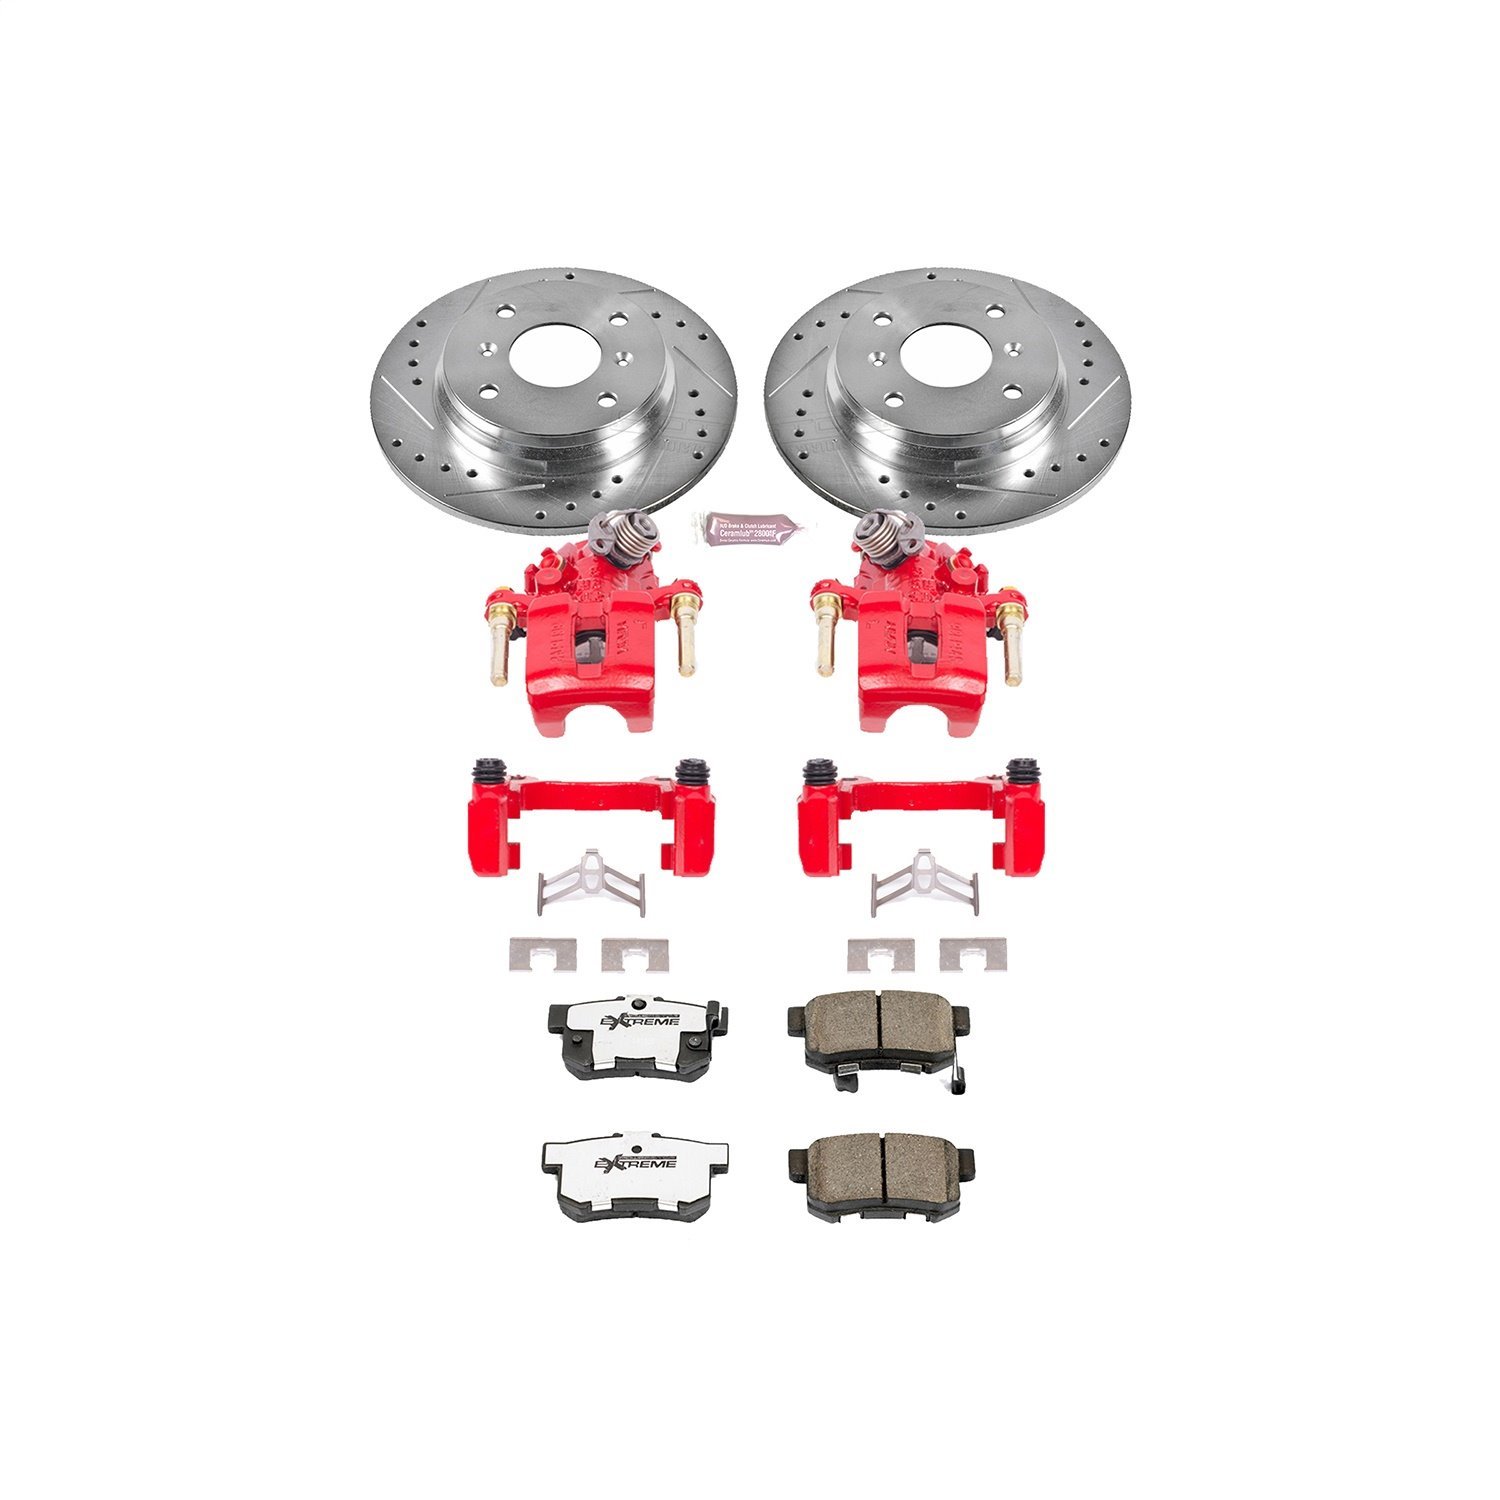 Street Warrior Brake Upgrade Kit Cross-Drilled and Slotted Rotors Z26 Extreme Street Performance Bra